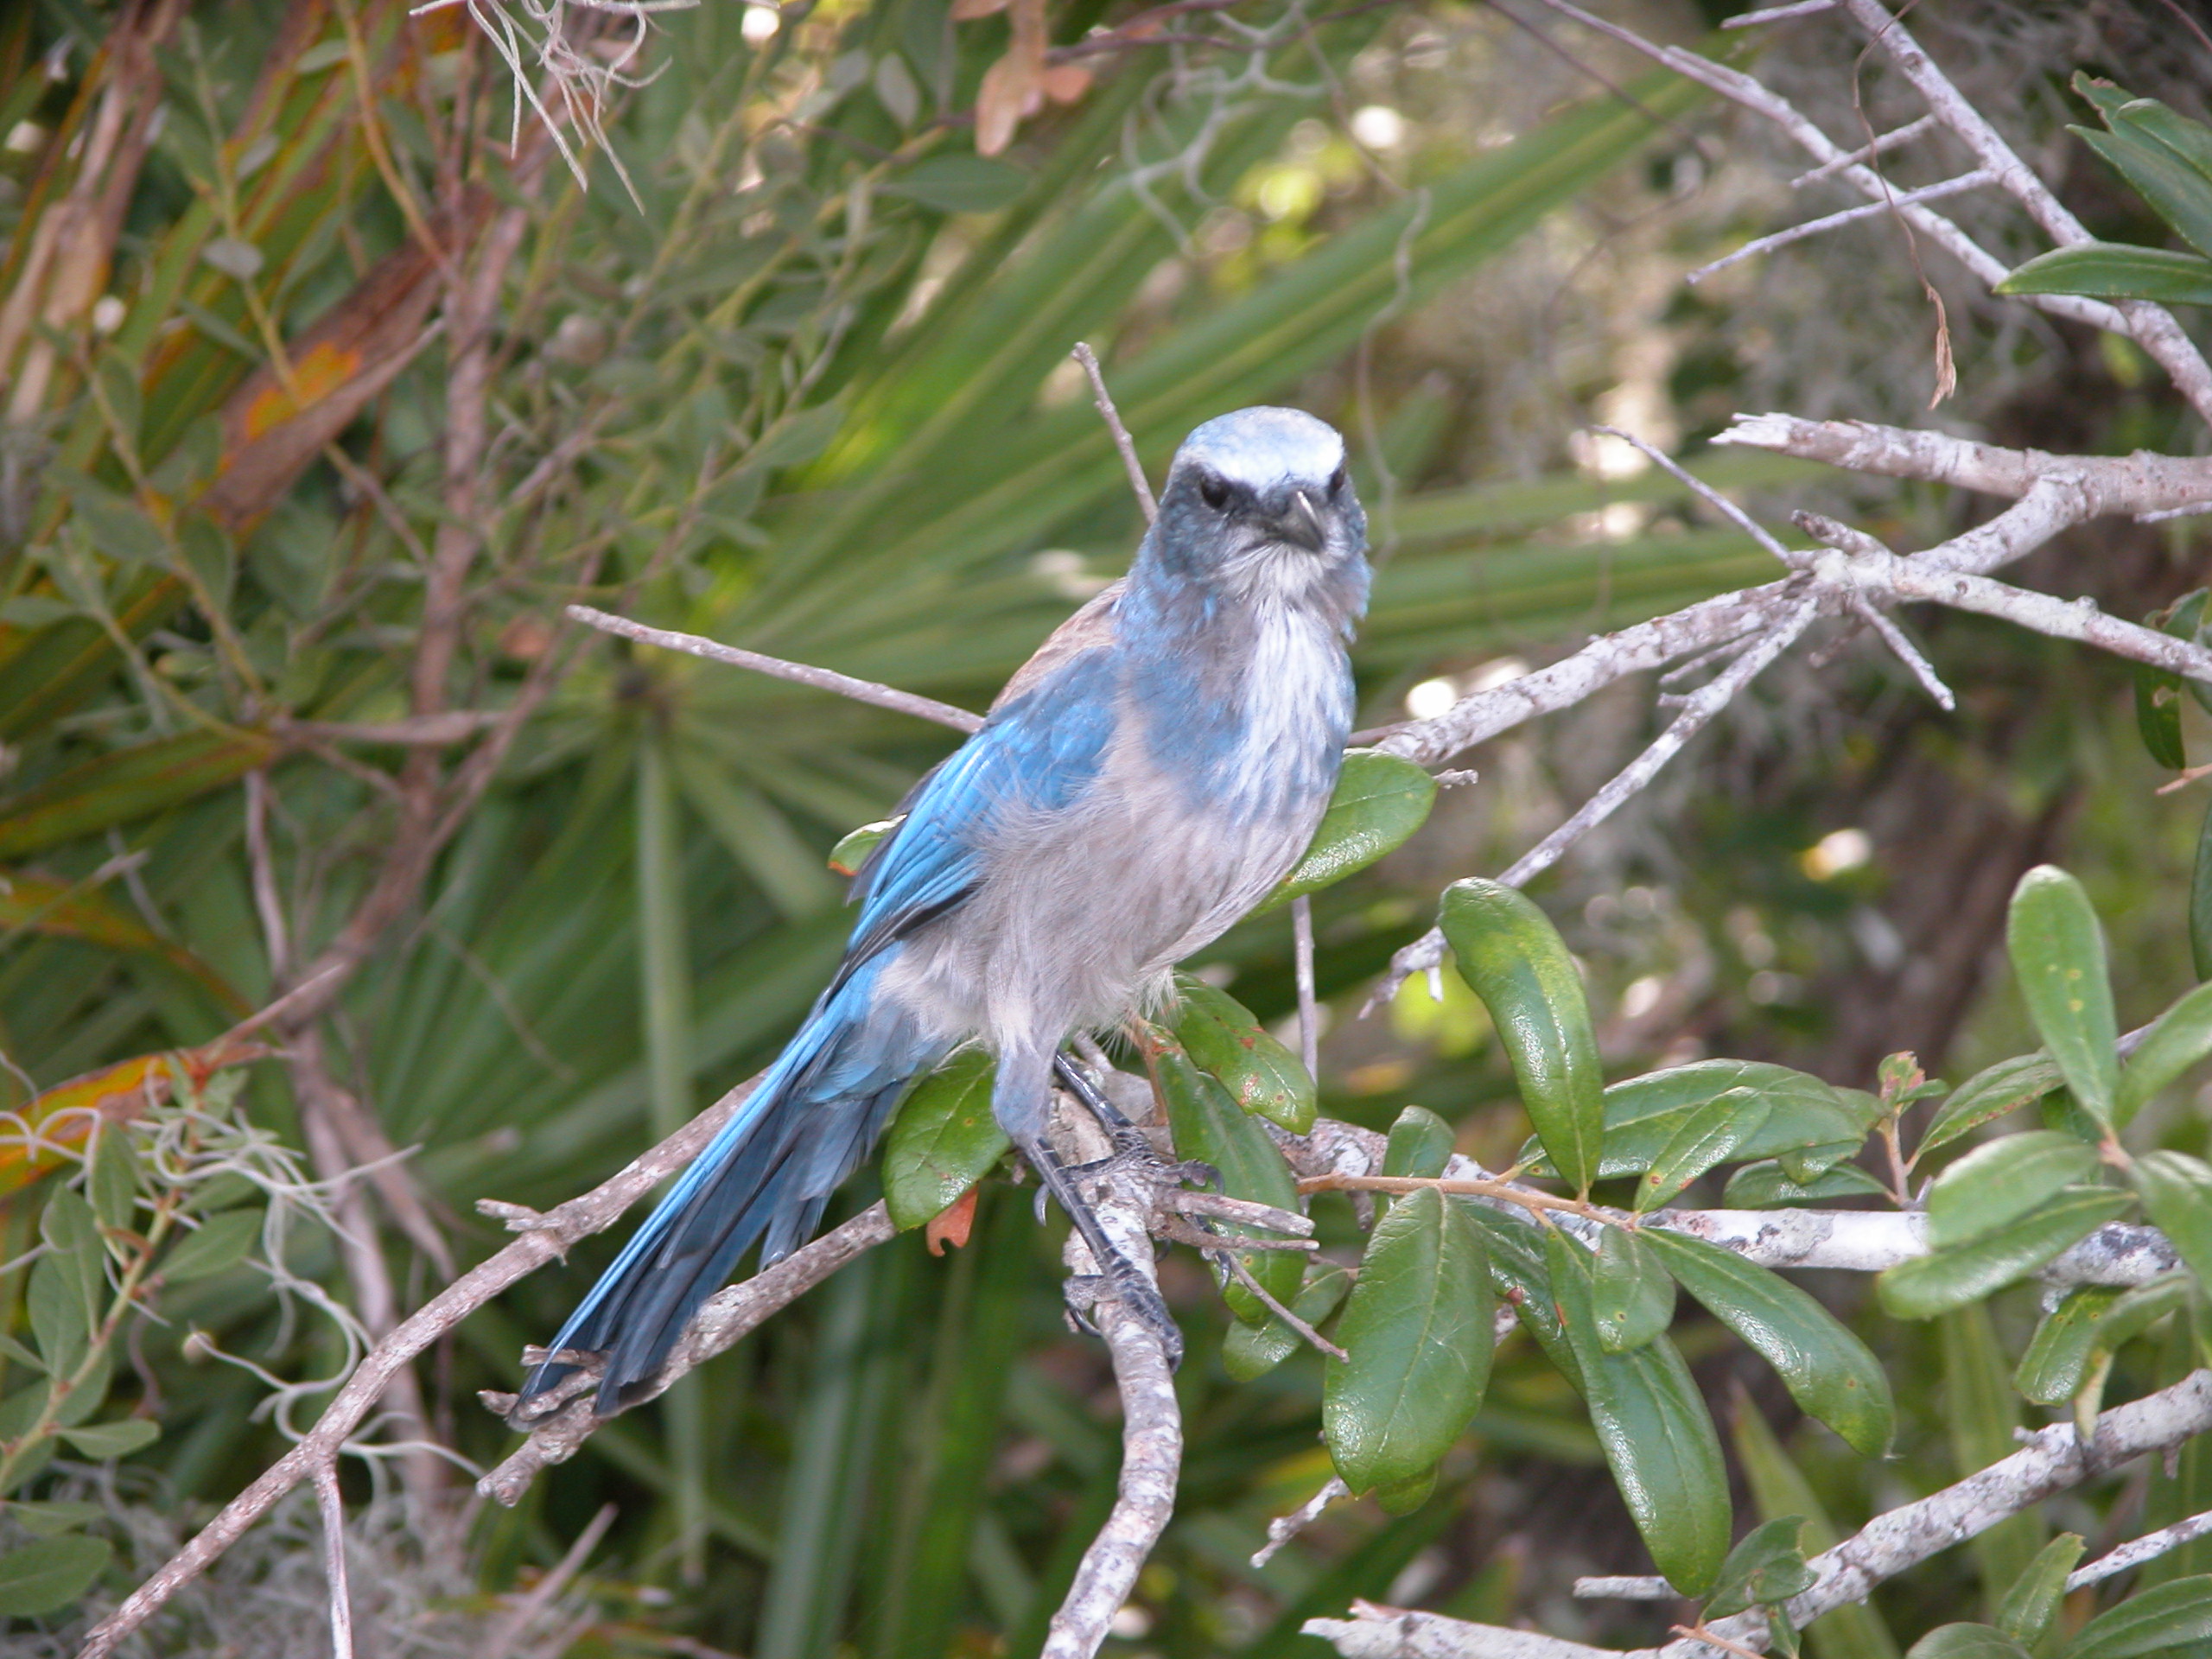 Scrub Jay perched on a branch at Catfish Creek